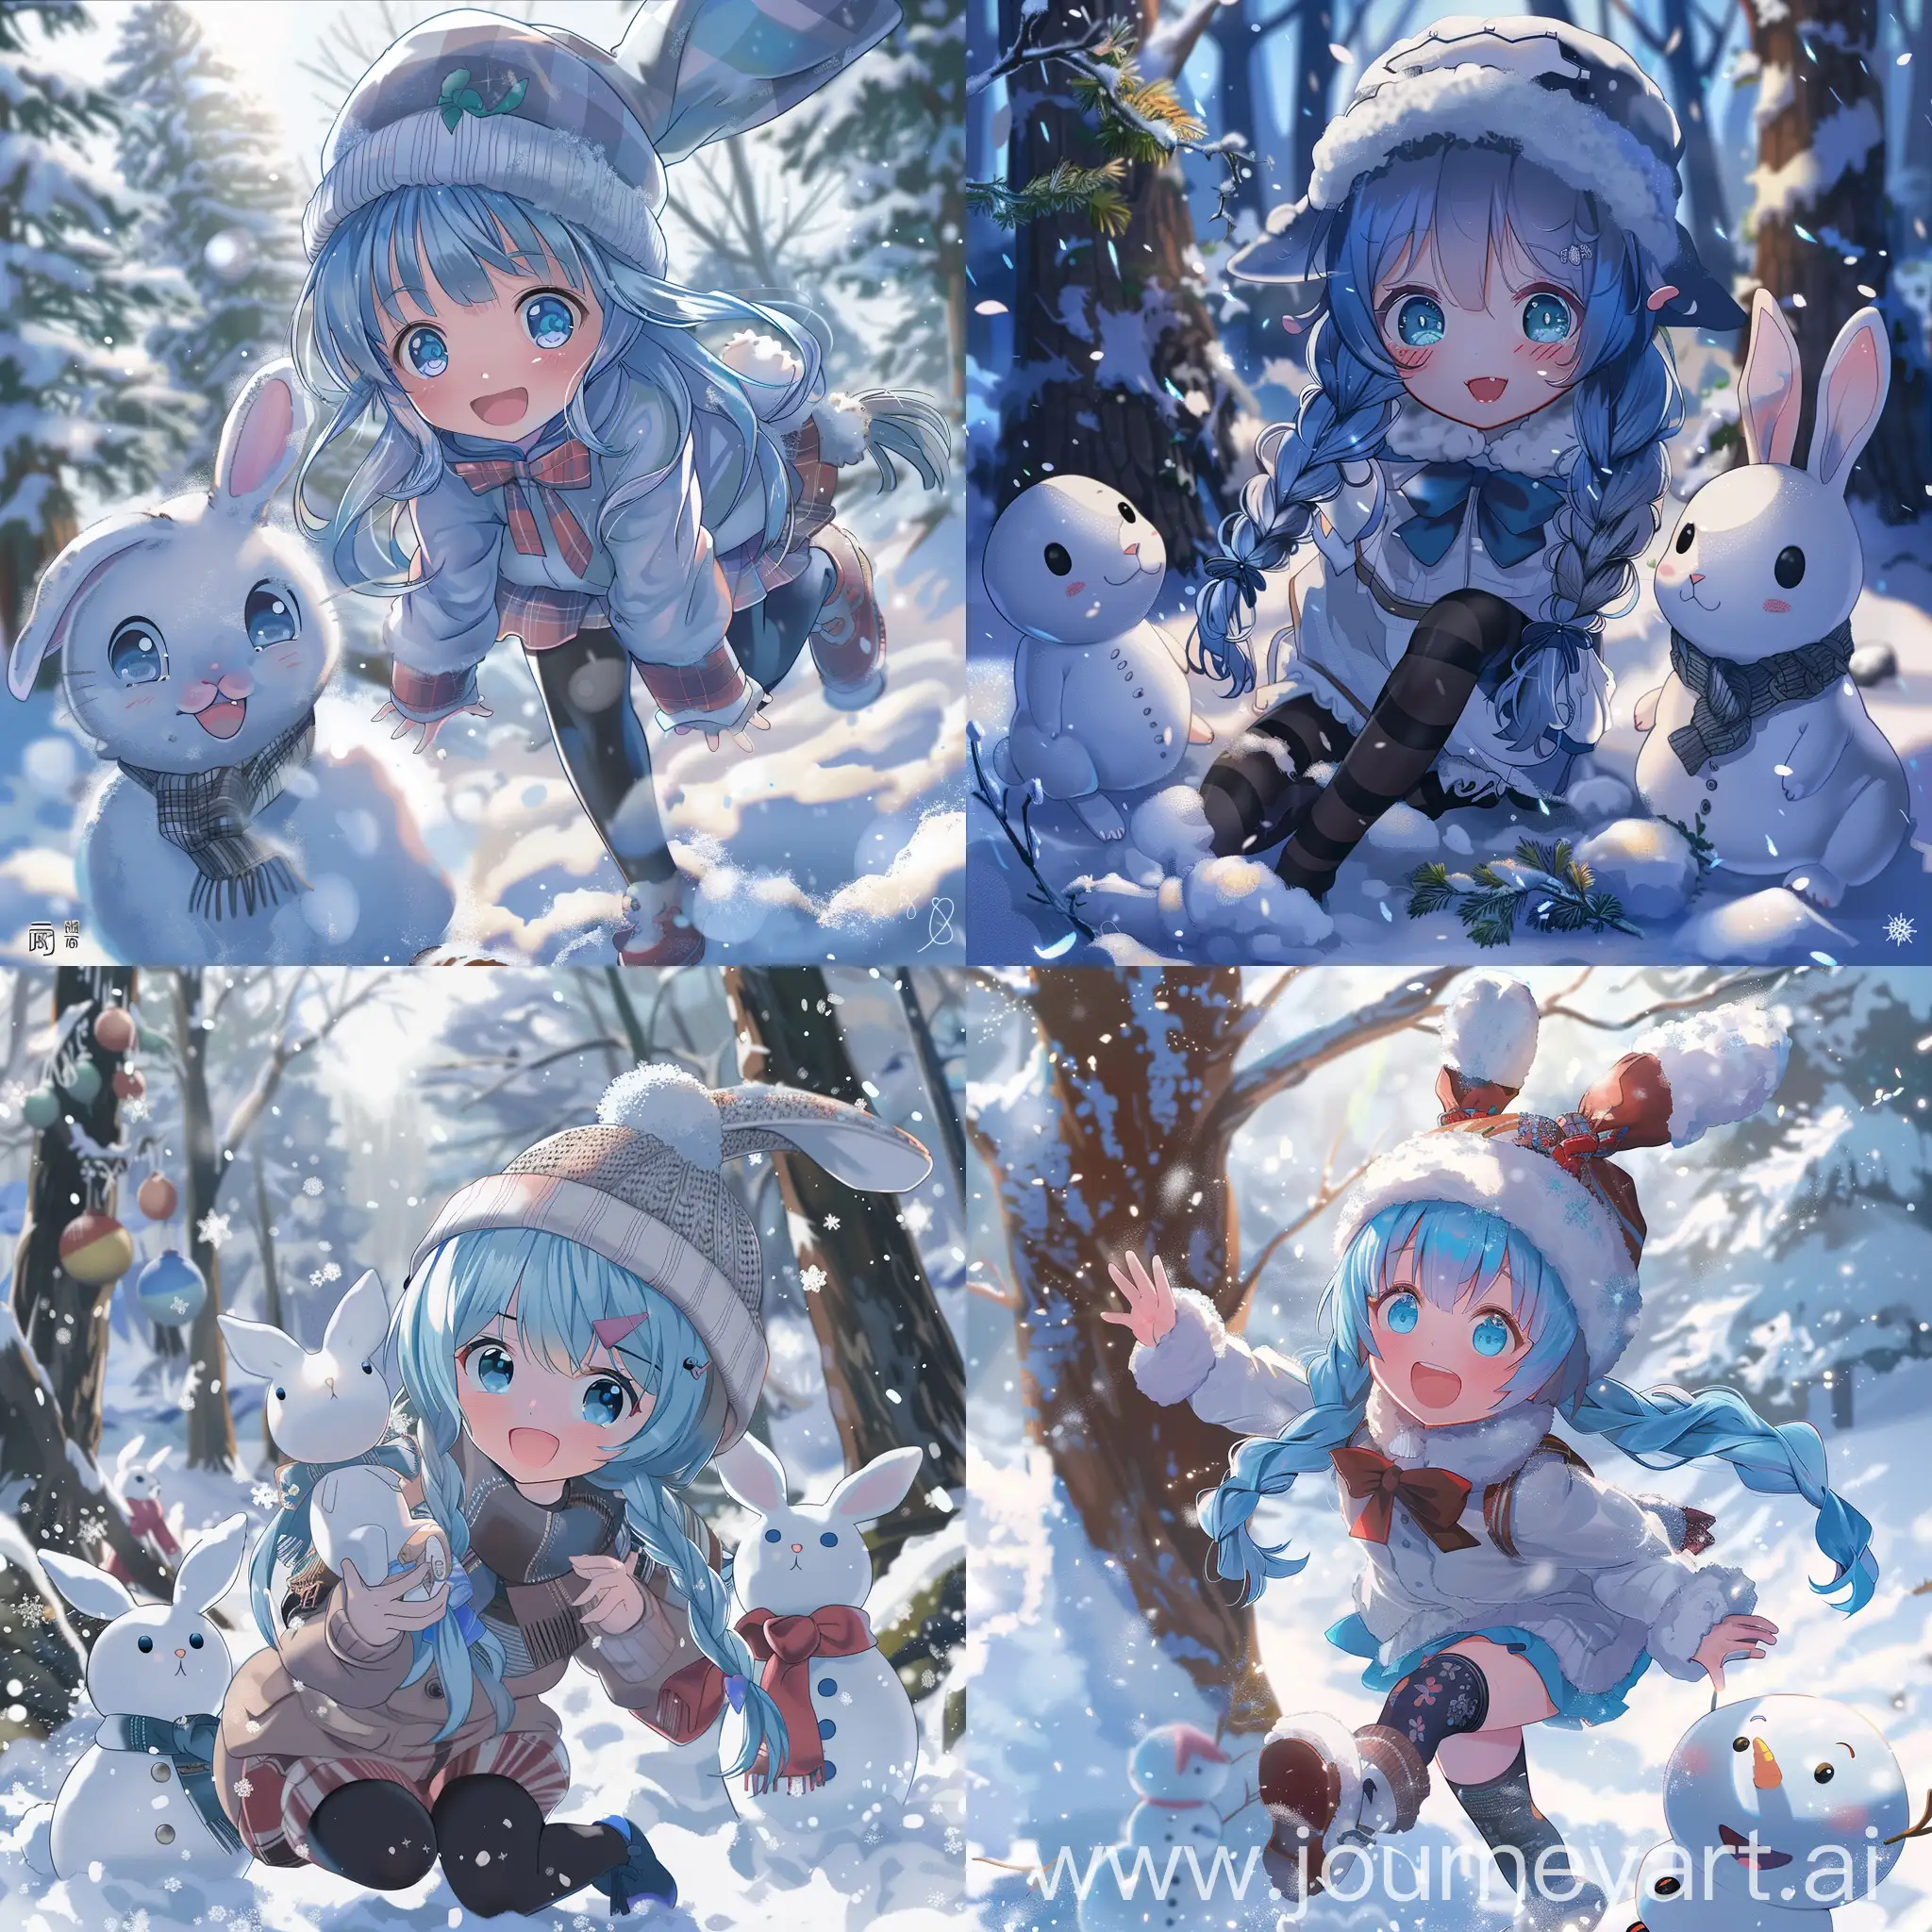 Winter-Wonderland-Little-Girl-in-Snow-with-Snow-Bunny-and-Snowman